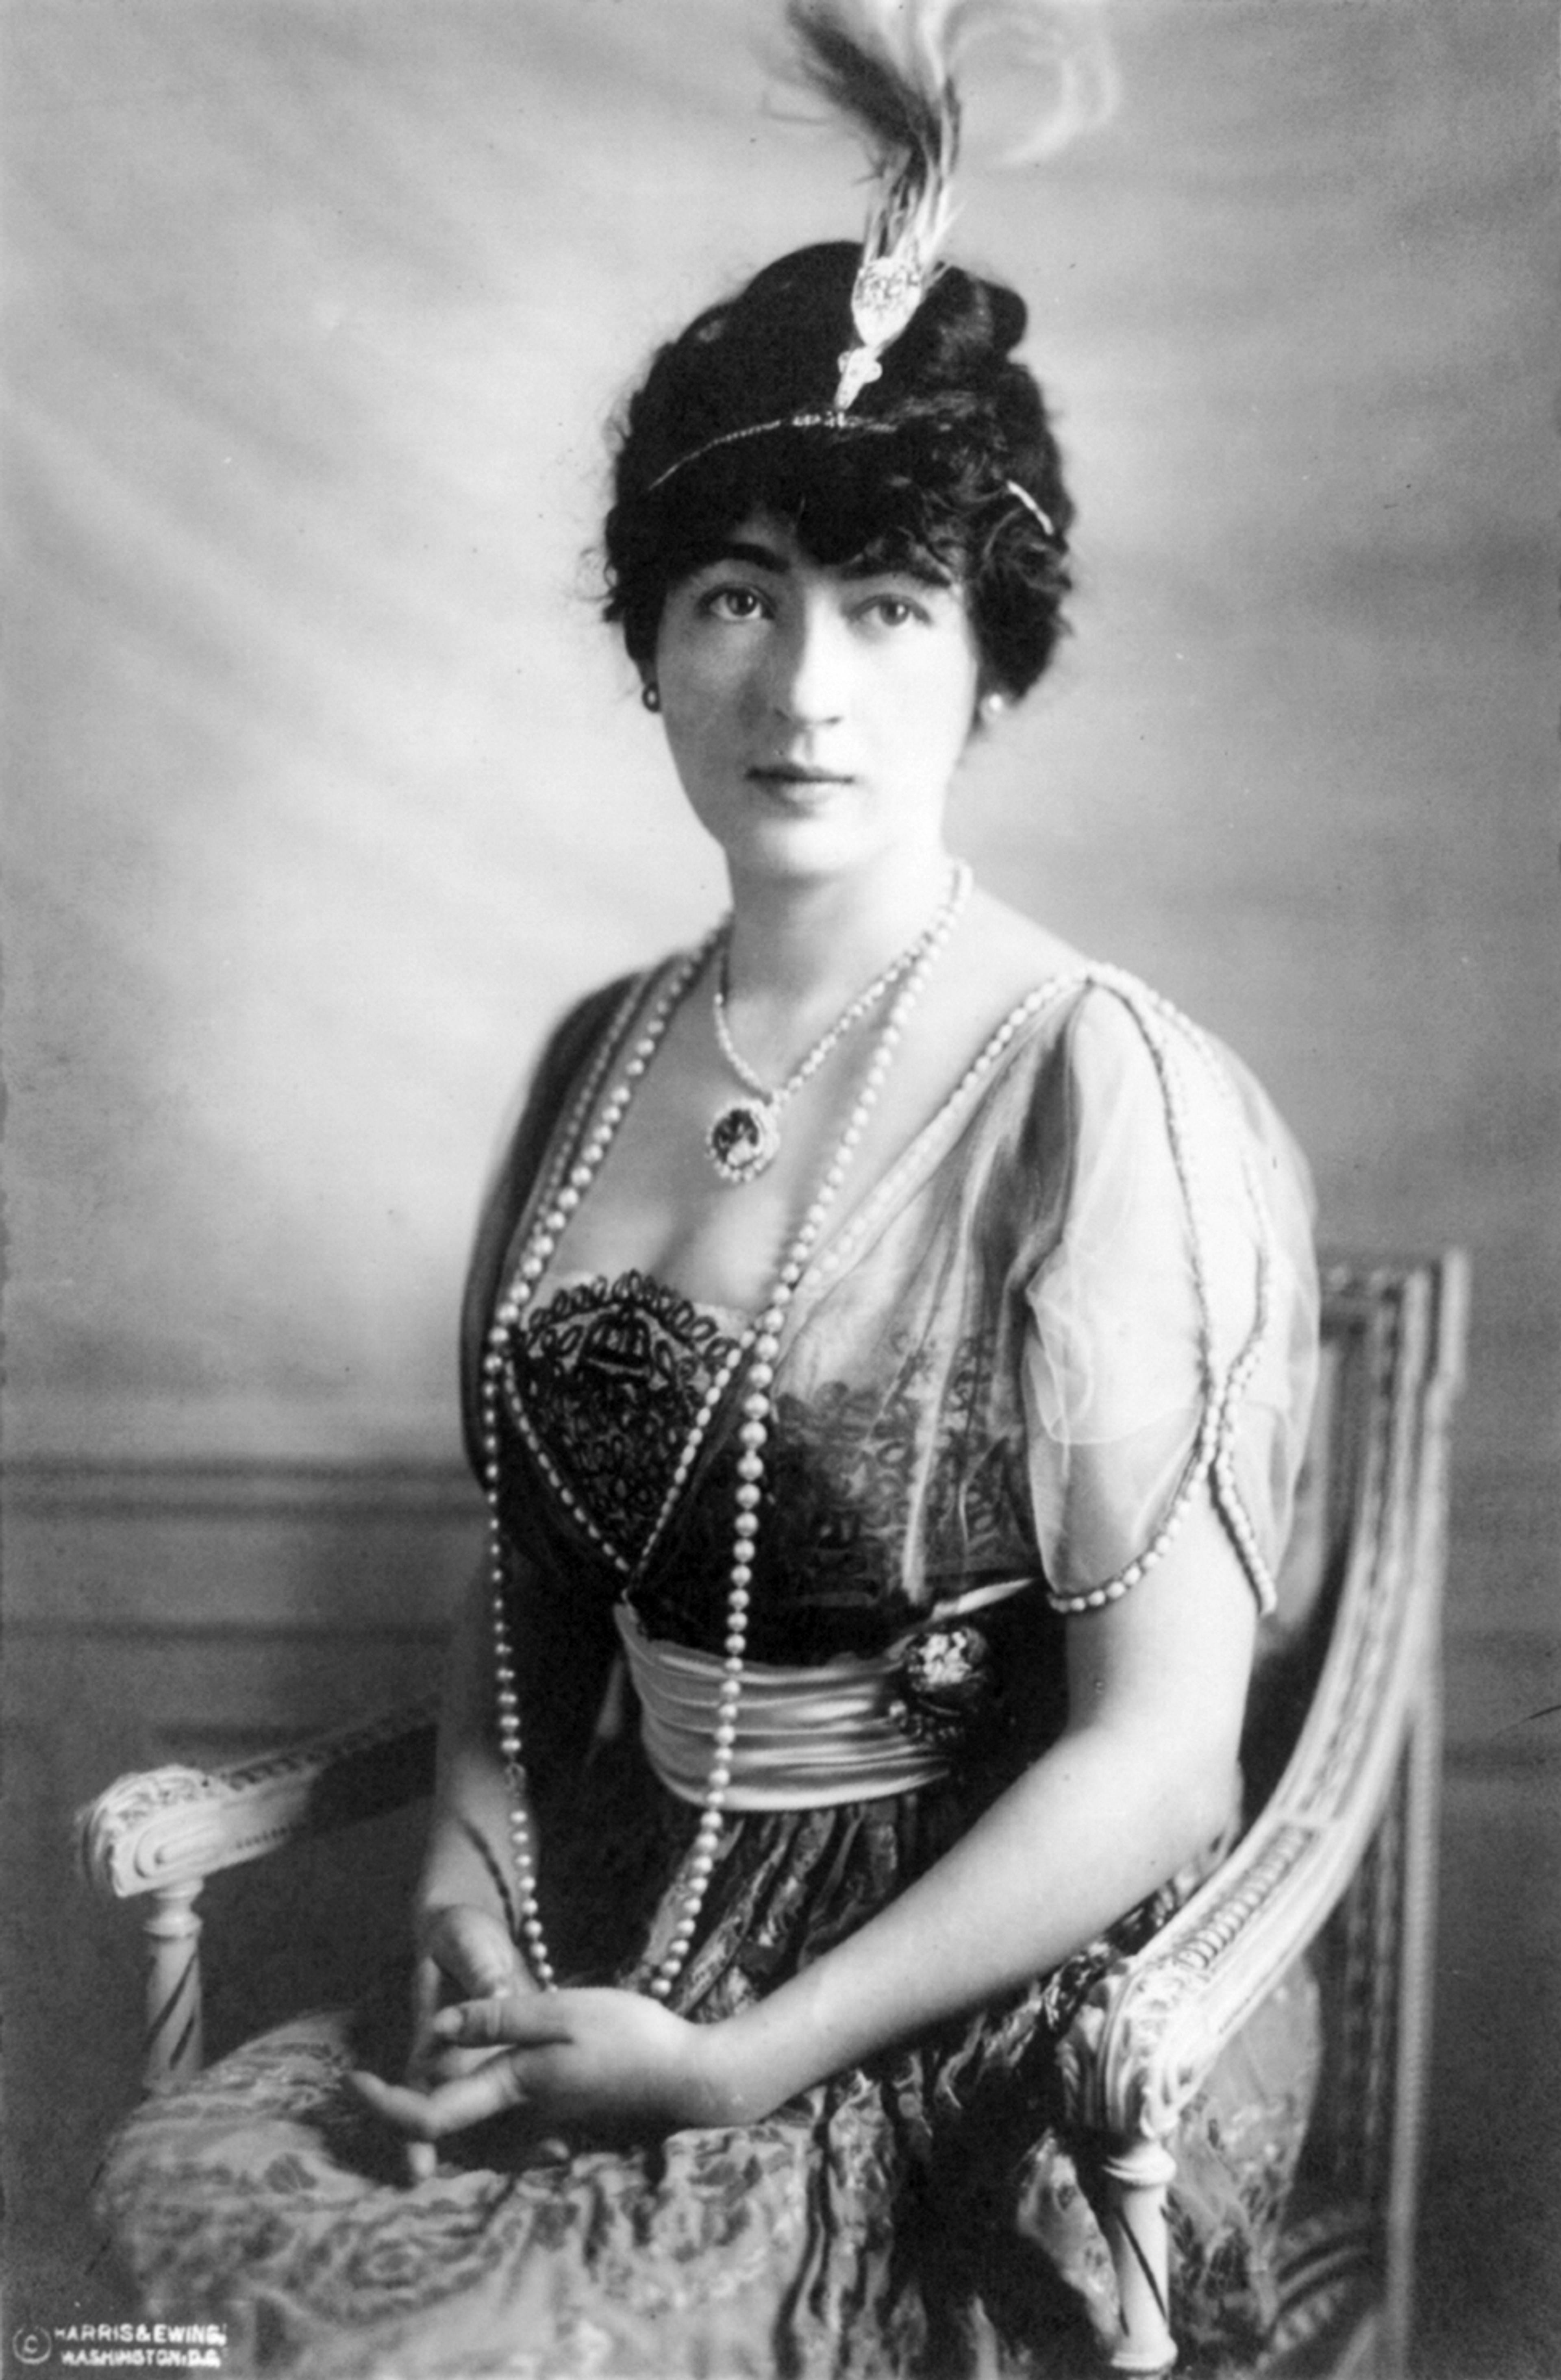 Socialite Evalyn Walsh McLean (her father discovered a gold mine) wearing an aigrette (and the Hope Diamond), 1912